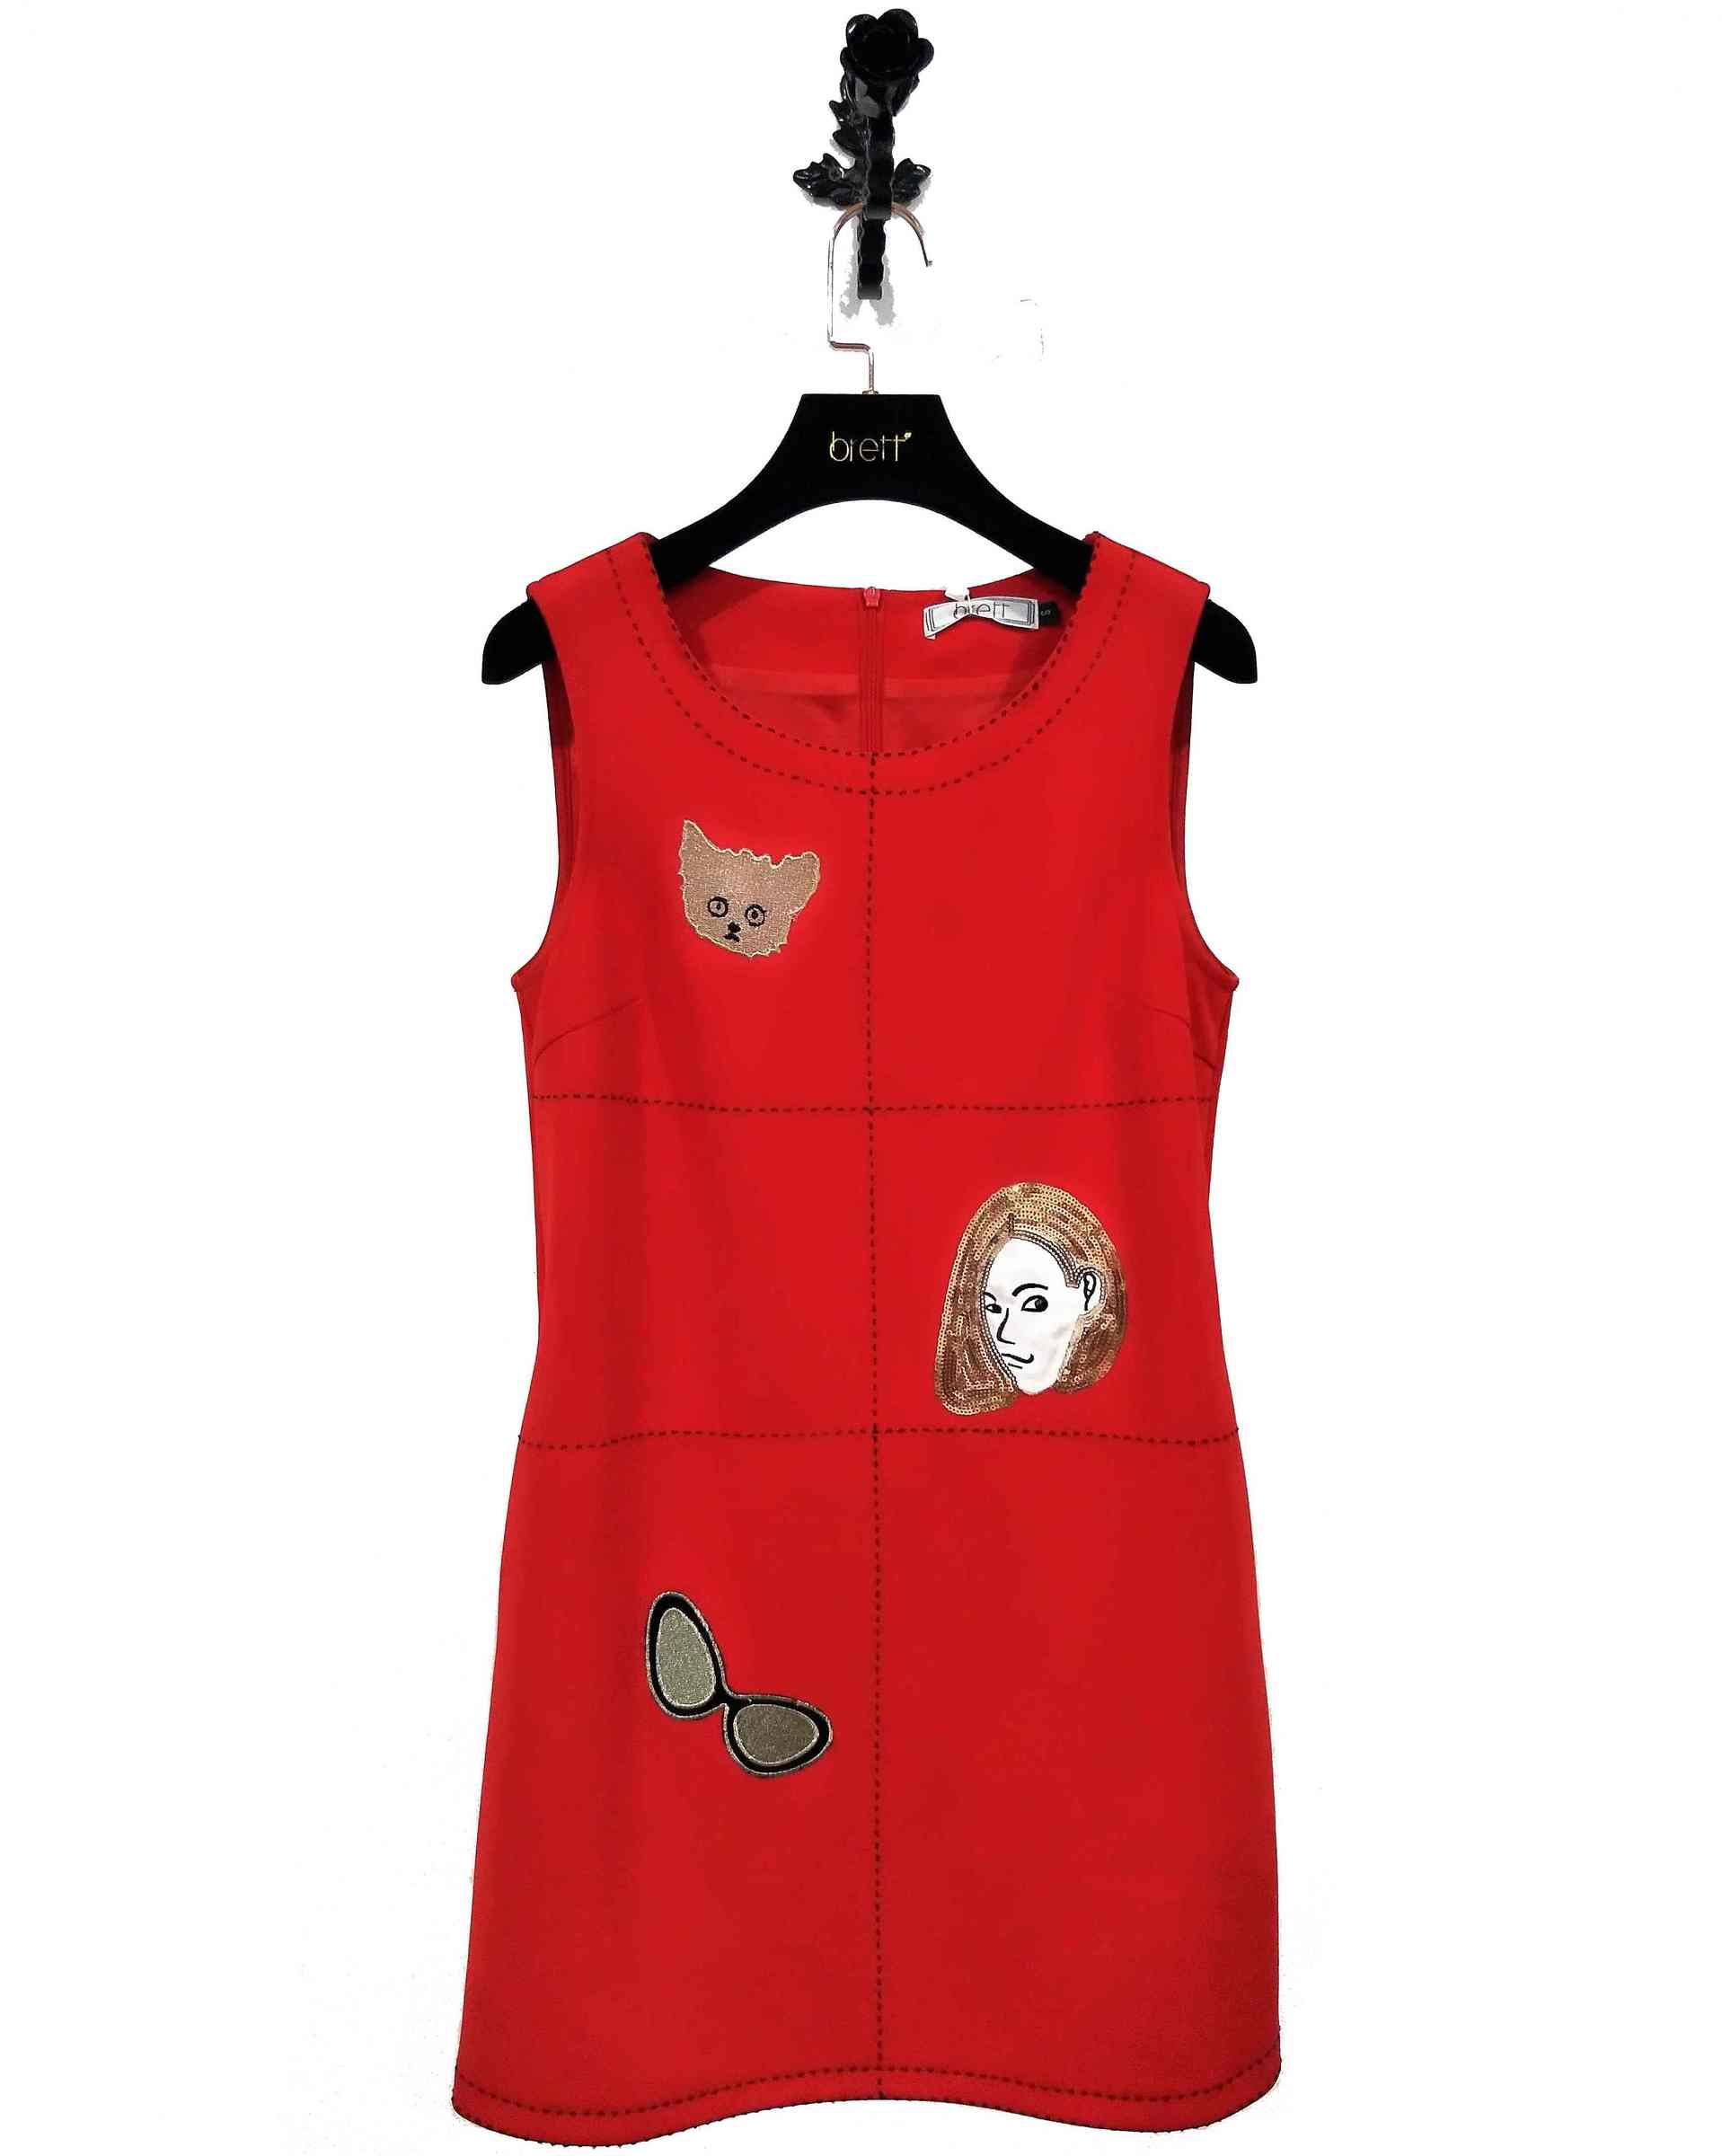 Fashion casual red appliqued dress ladies with Red Embroidered dress for Winter Sleeveless dress (7).jpg